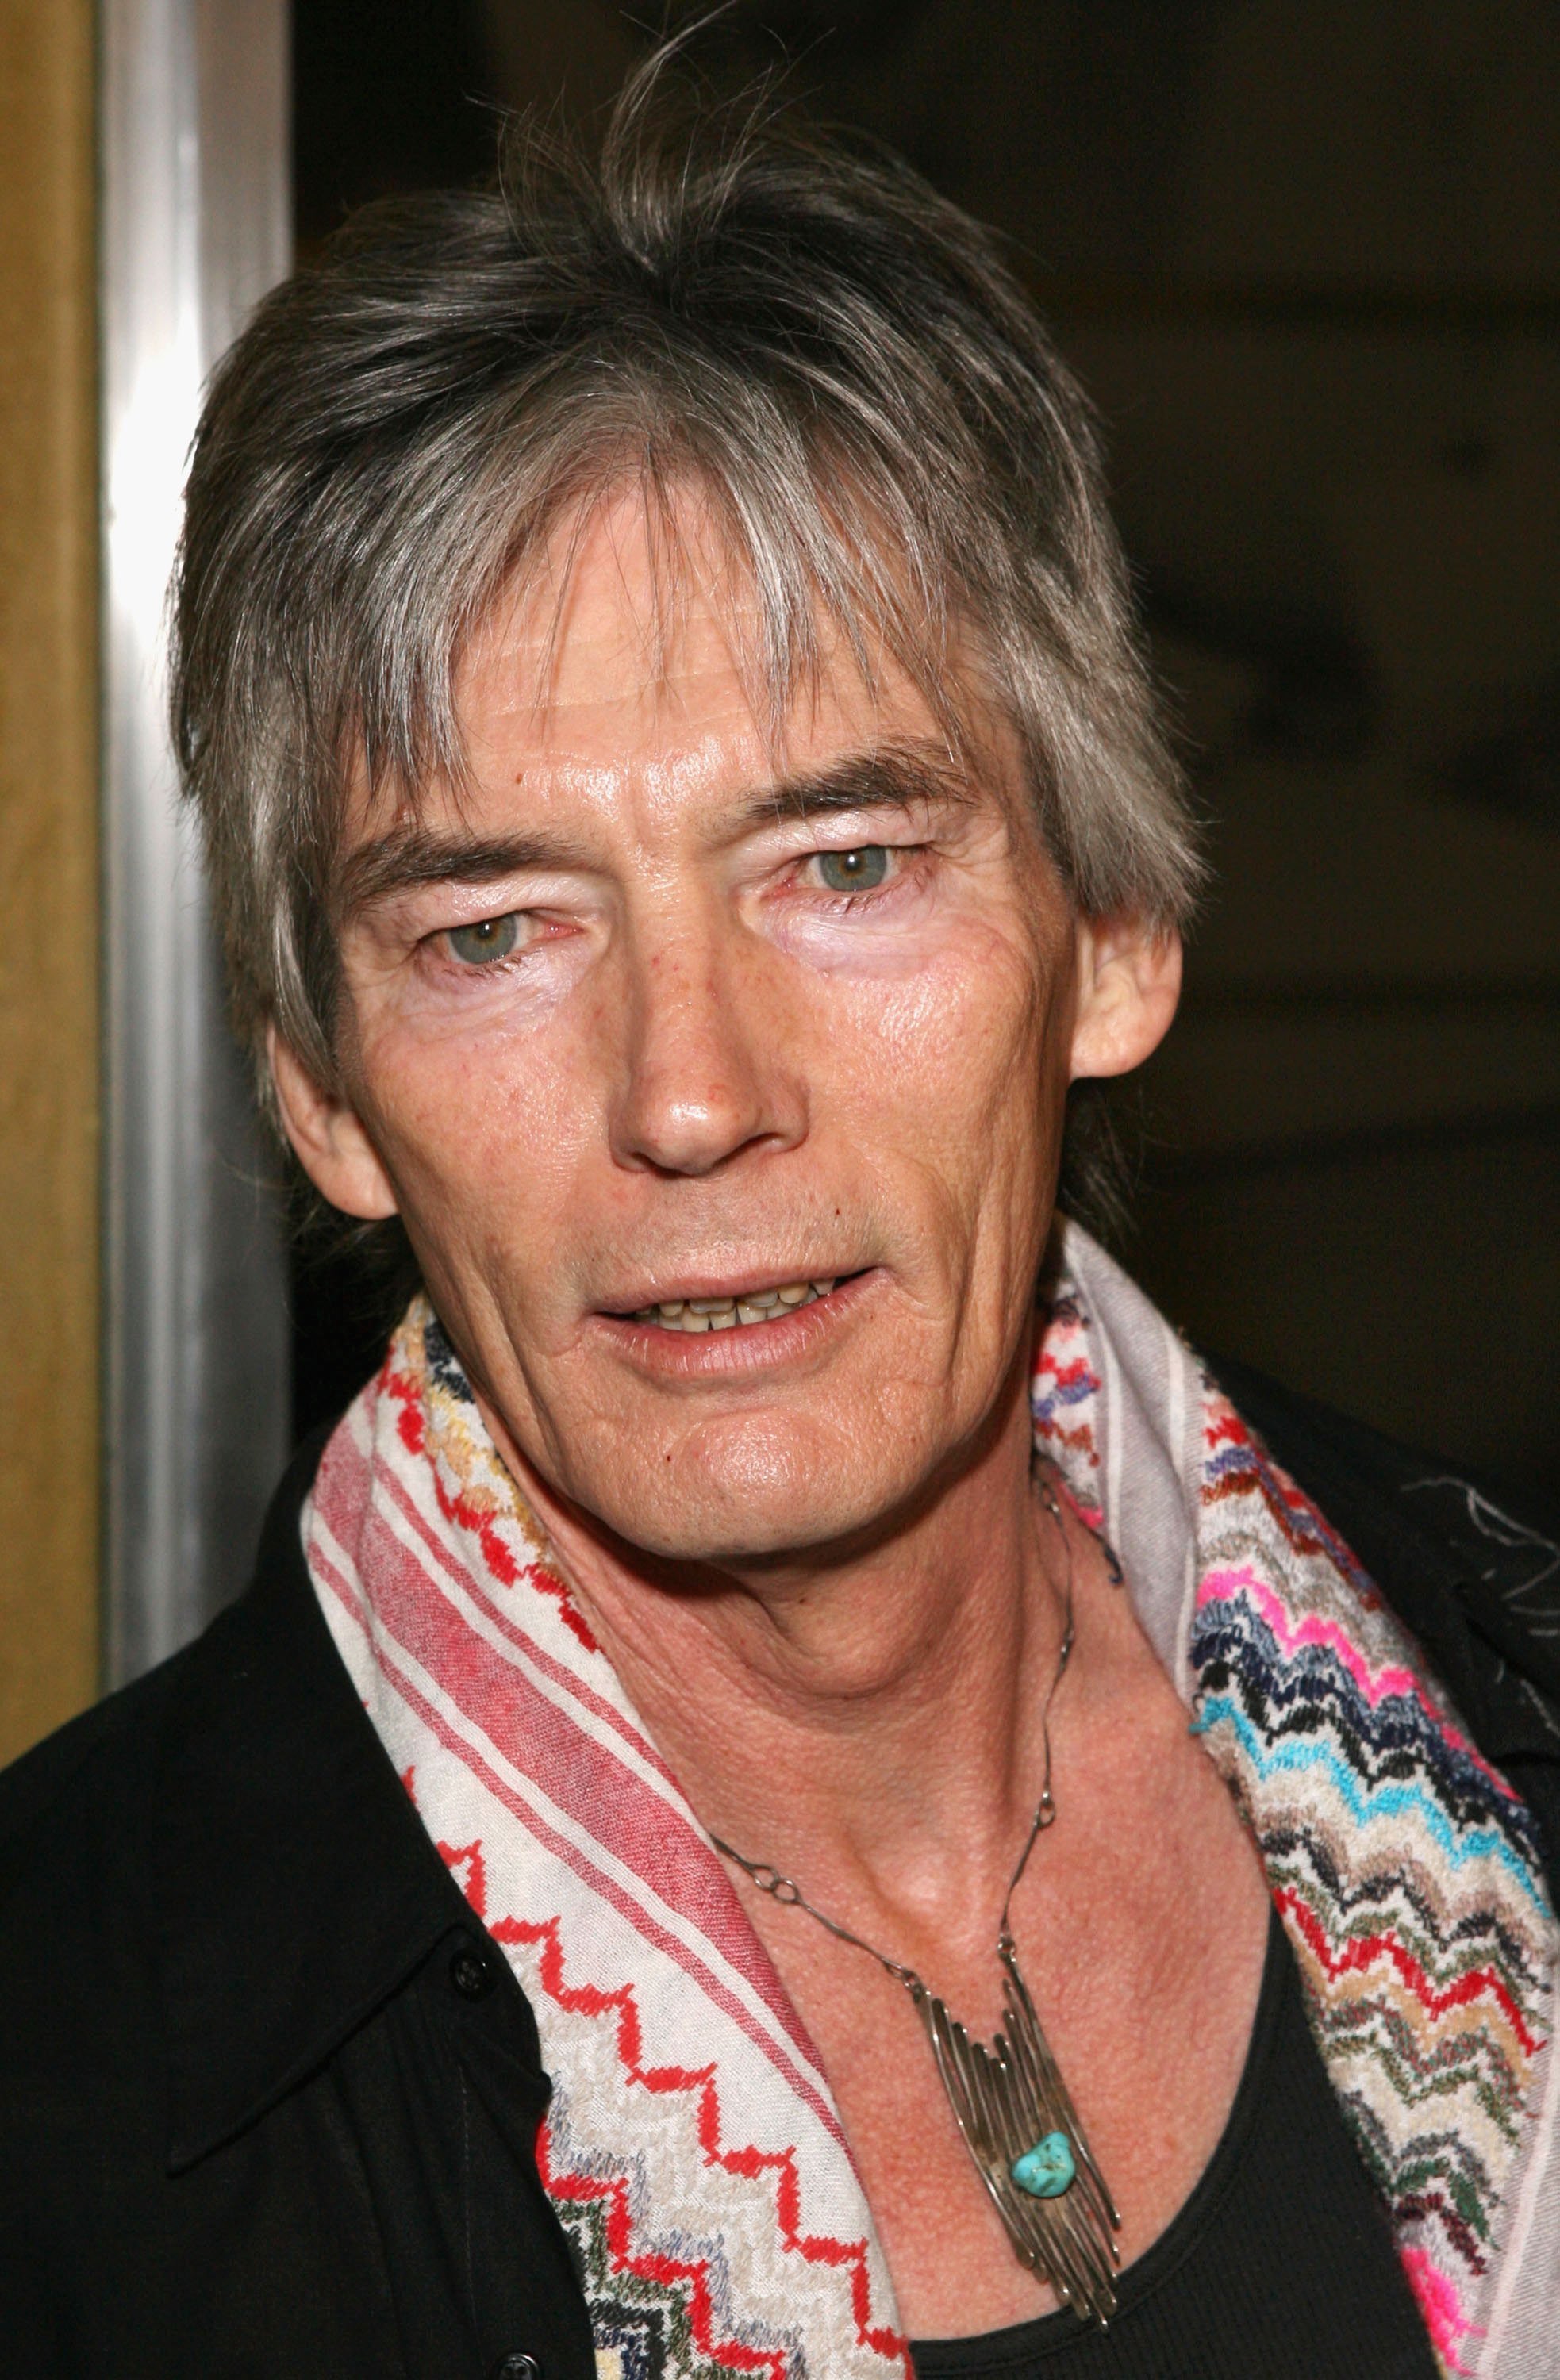 Actor Billy Drago at the premiere of Fox Searchlight Pictures' "The Hills Have Eyes" in Los Angeles, 2006. Photo: Getty Images/GlobalImagesUkraine